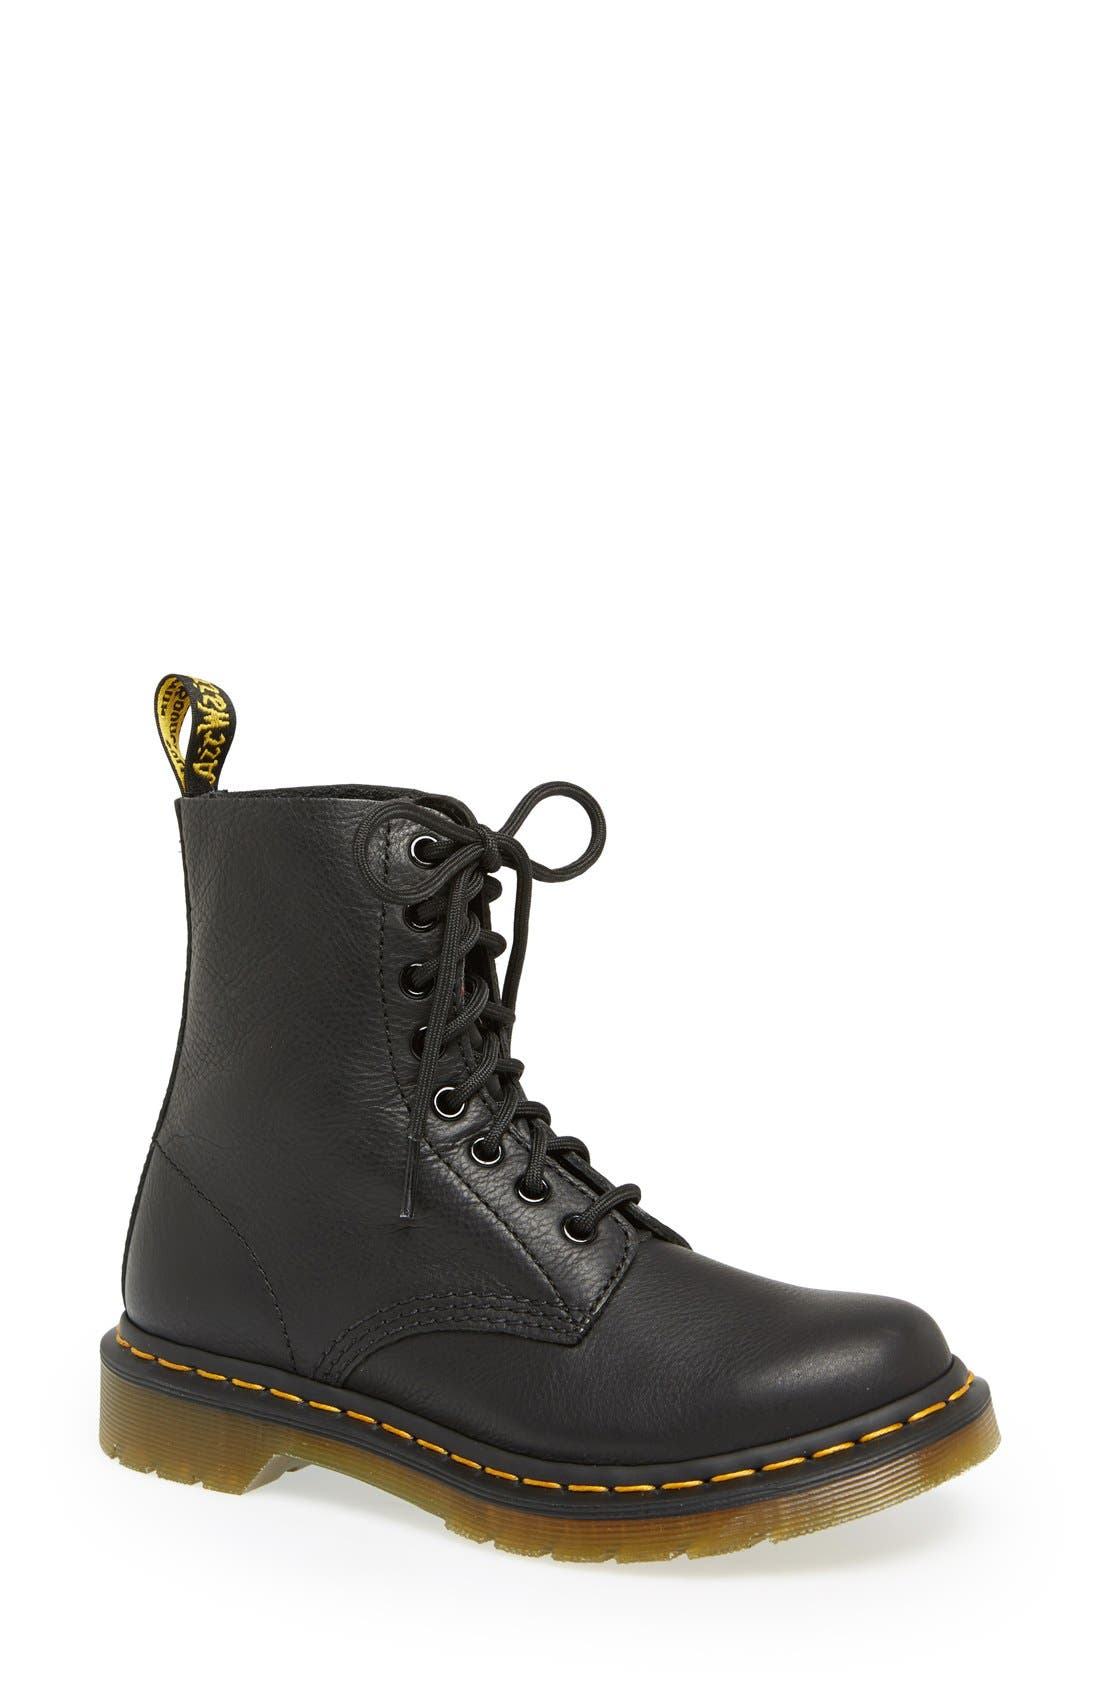 doctor martens boots price list